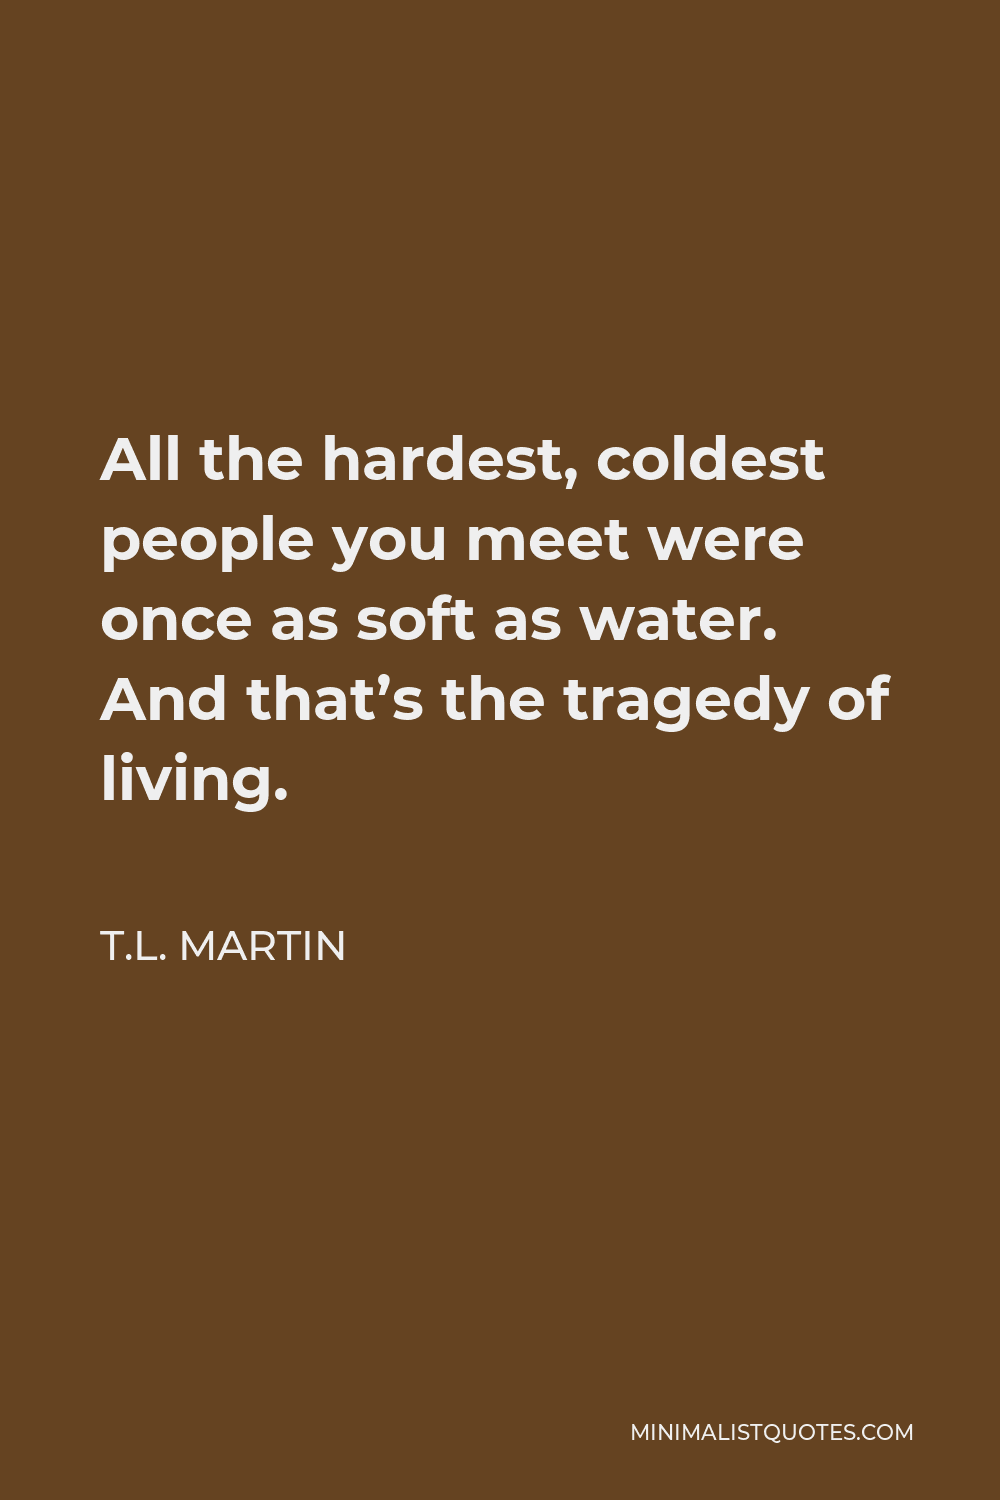 T.L. Martin Quote - All the hardest, coldest people you meet were once as soft as water. And that’s the tragedy of living.